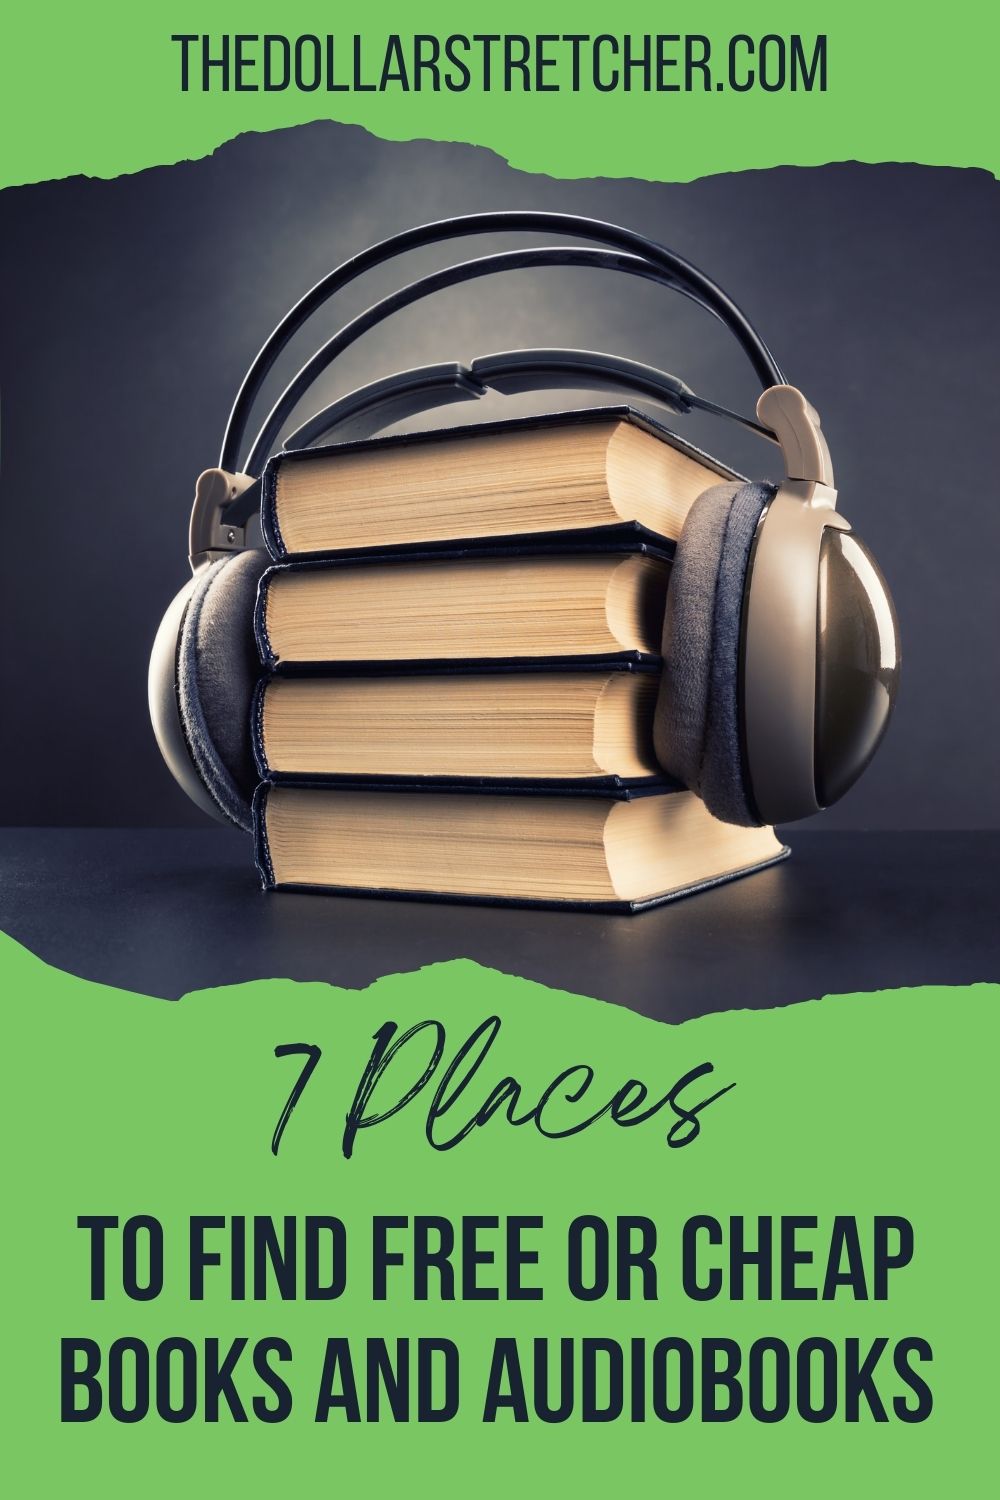 Free or Cheap Books and Audiobooks PIN